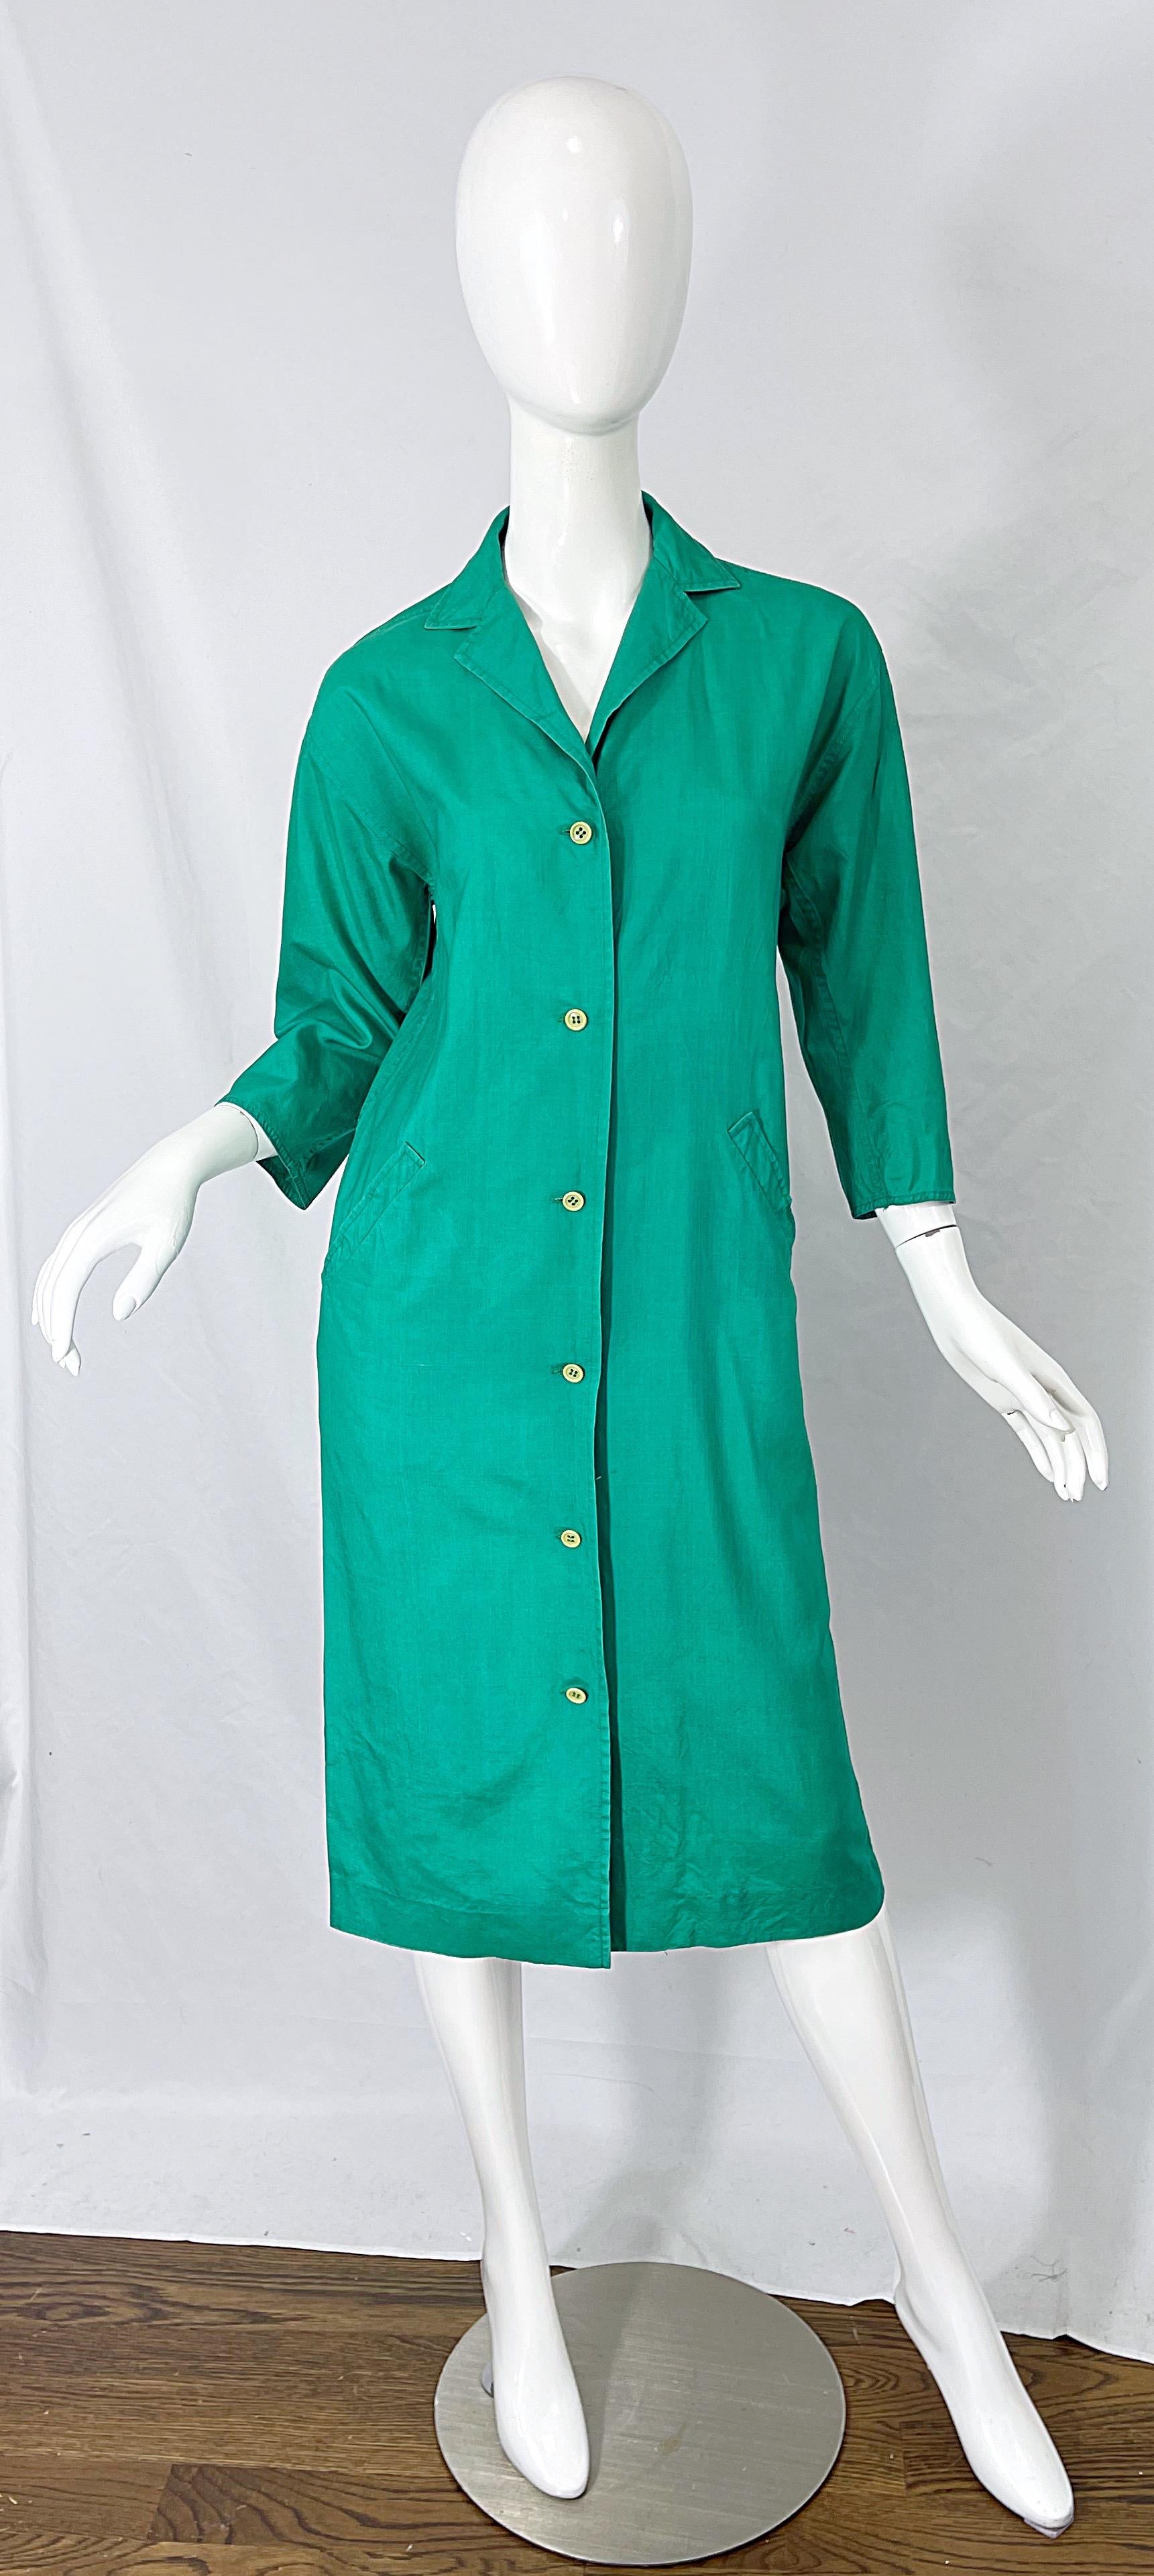 Chic classic 1970s HALSTON 3/4 sleeves silk shirt dress ! Buttons up the front. Pockets at each side of the waist. The perfect dress for anytime of year. Very well made with heavy attention to details. Can easily be dressed up or down, belted or